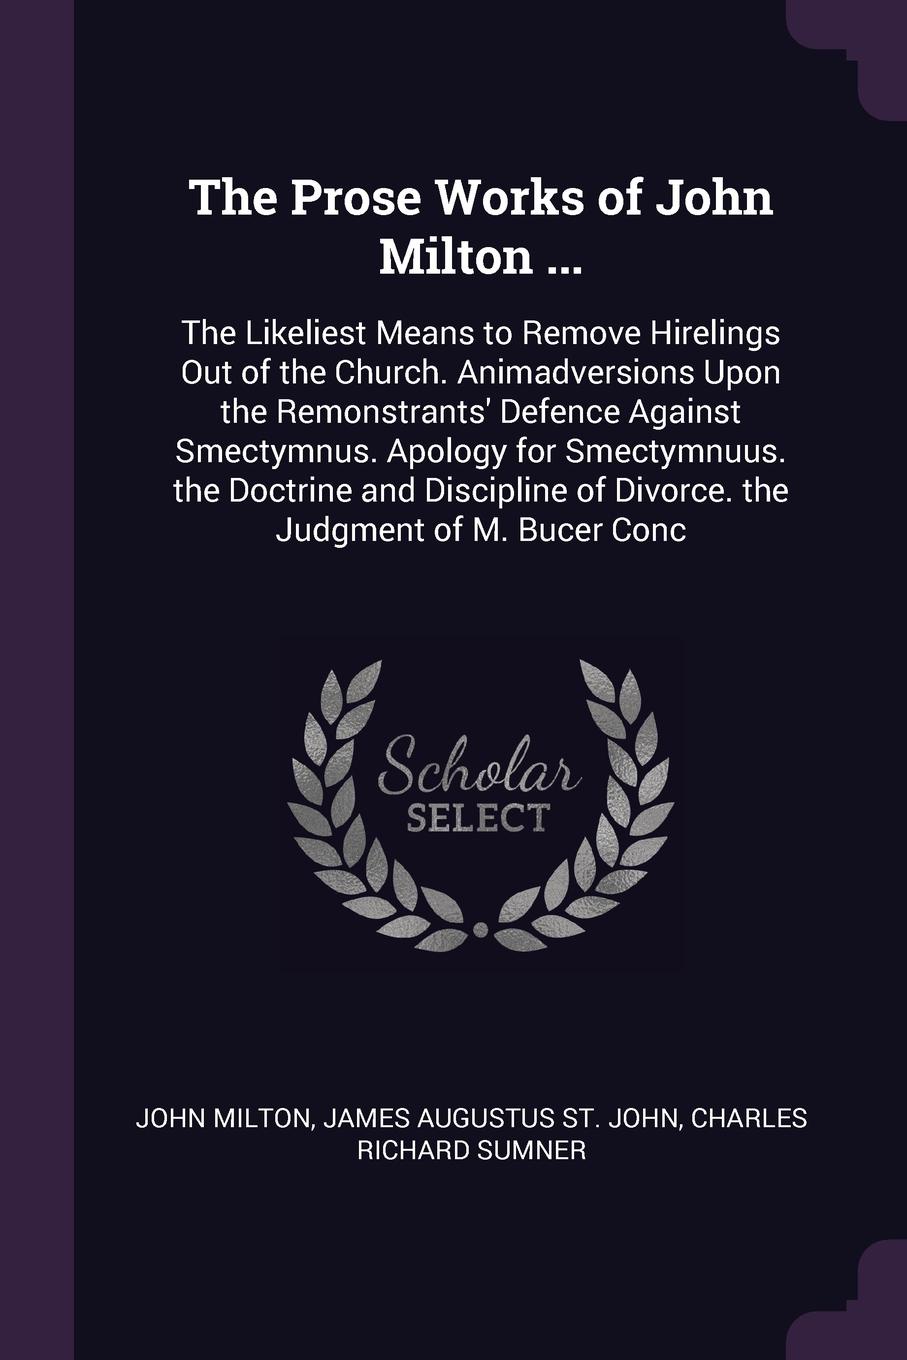 The Prose Works of John Milton ... The Likeliest Means to Remove Hirelings Out of the Church. Animadversions Upon the Remonstrants` Defence Against Smectymnus. Apology for Smectymnuus. the Doctrine and Discipline of Divorce. the Judgment of M. Buc...